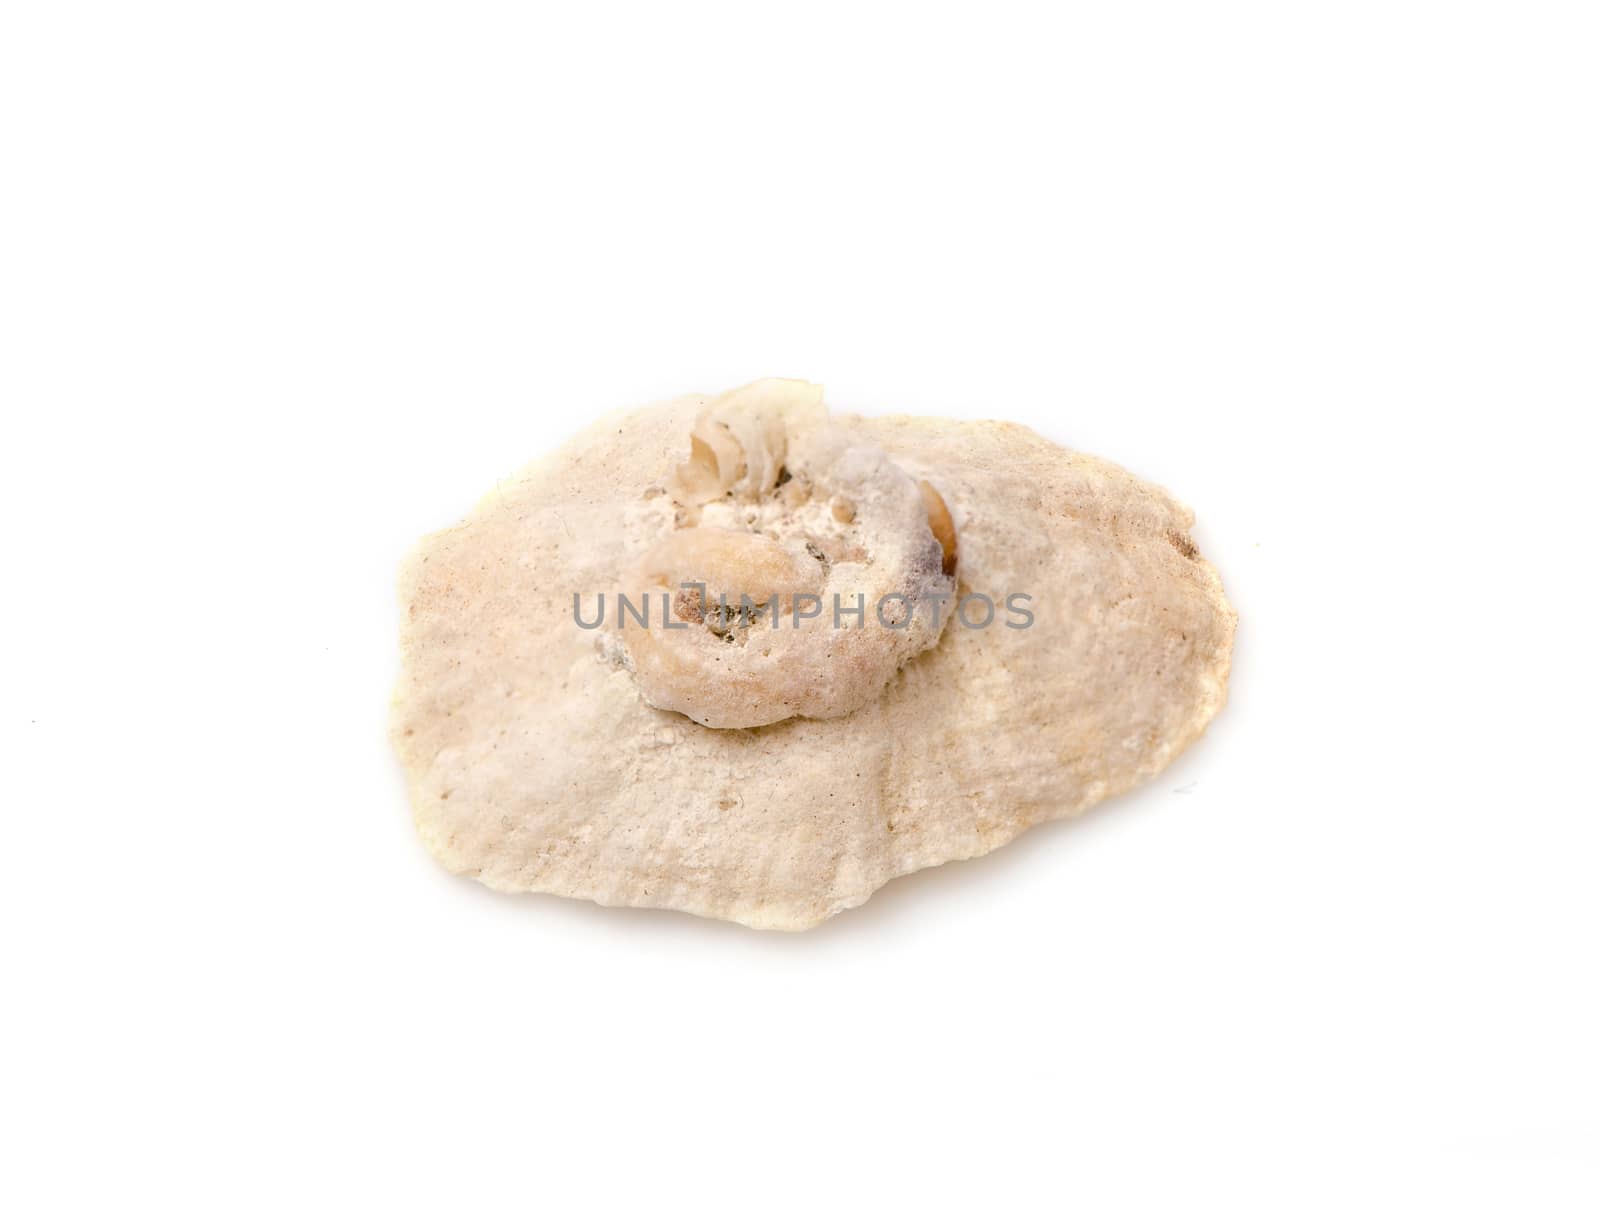 Sea shell with isolated on white background.